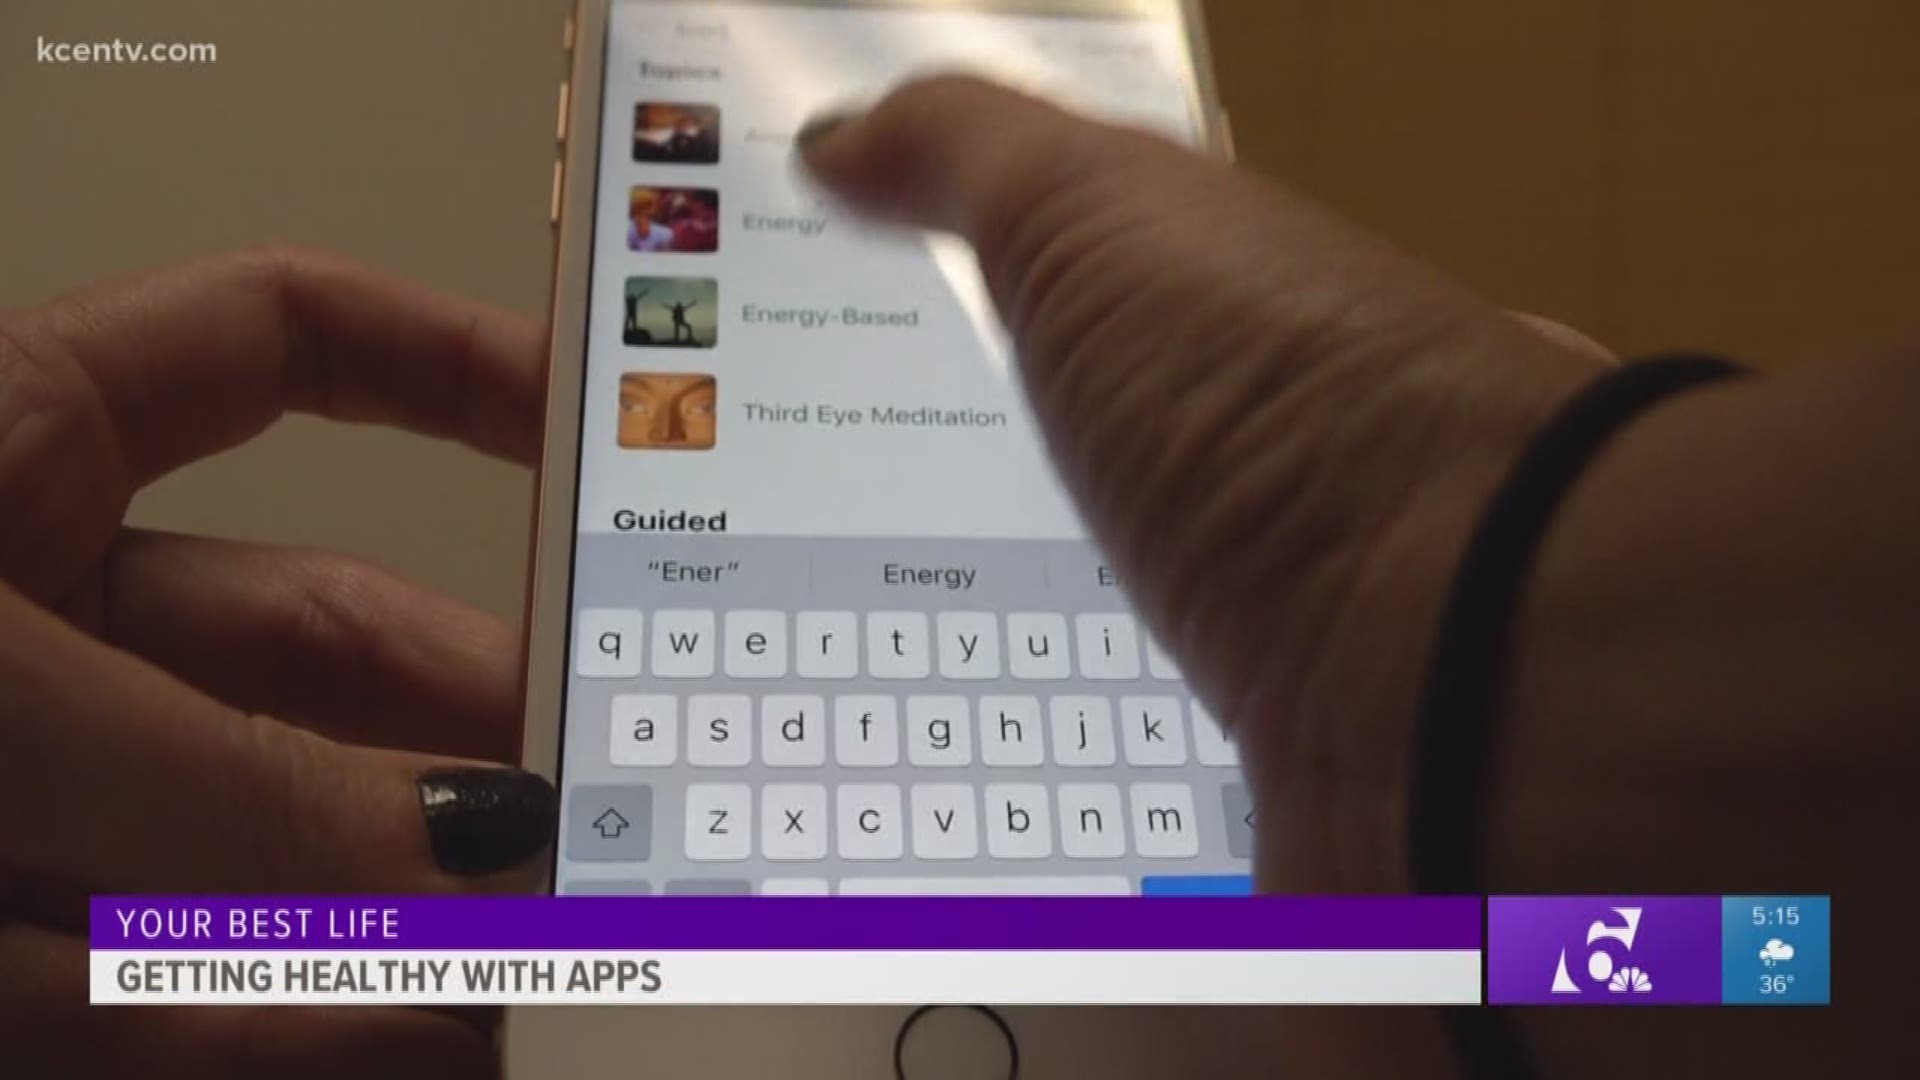 Leslie Draffin takes a look at apps that can help users keep their 2019 resolutions.